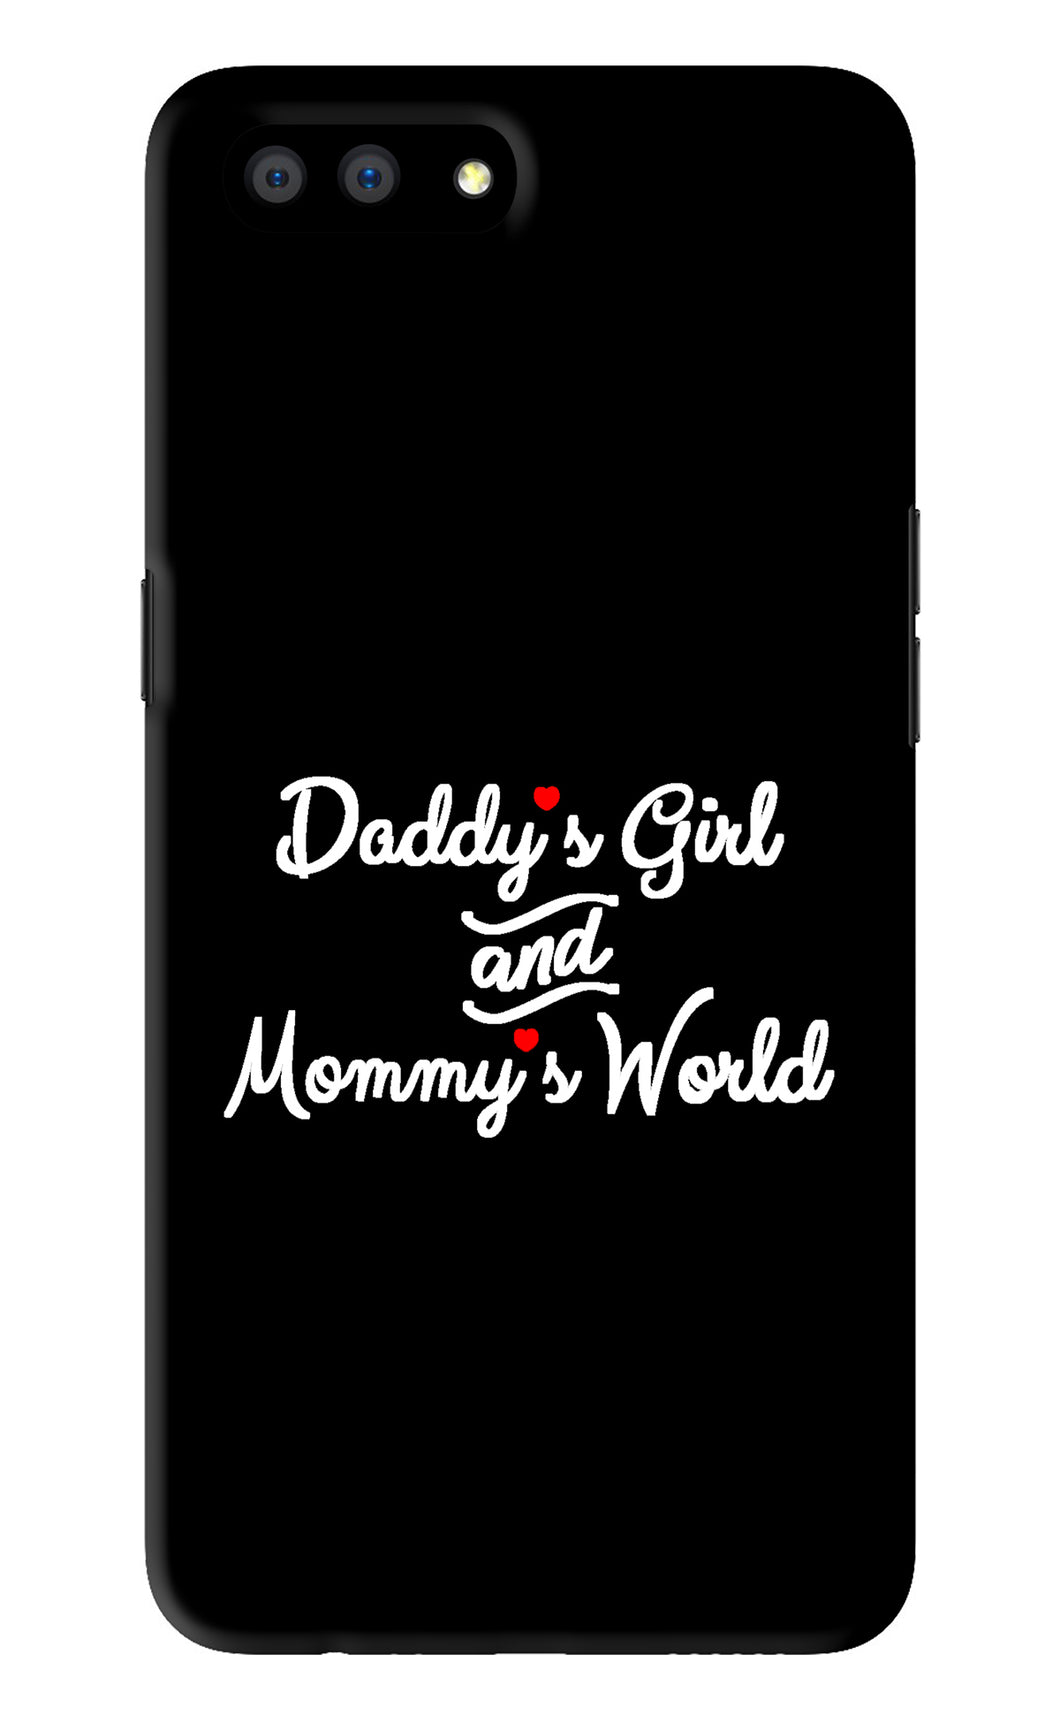 Daddy's Girl and Mommy's World Realme C1 Back Skin Wrap